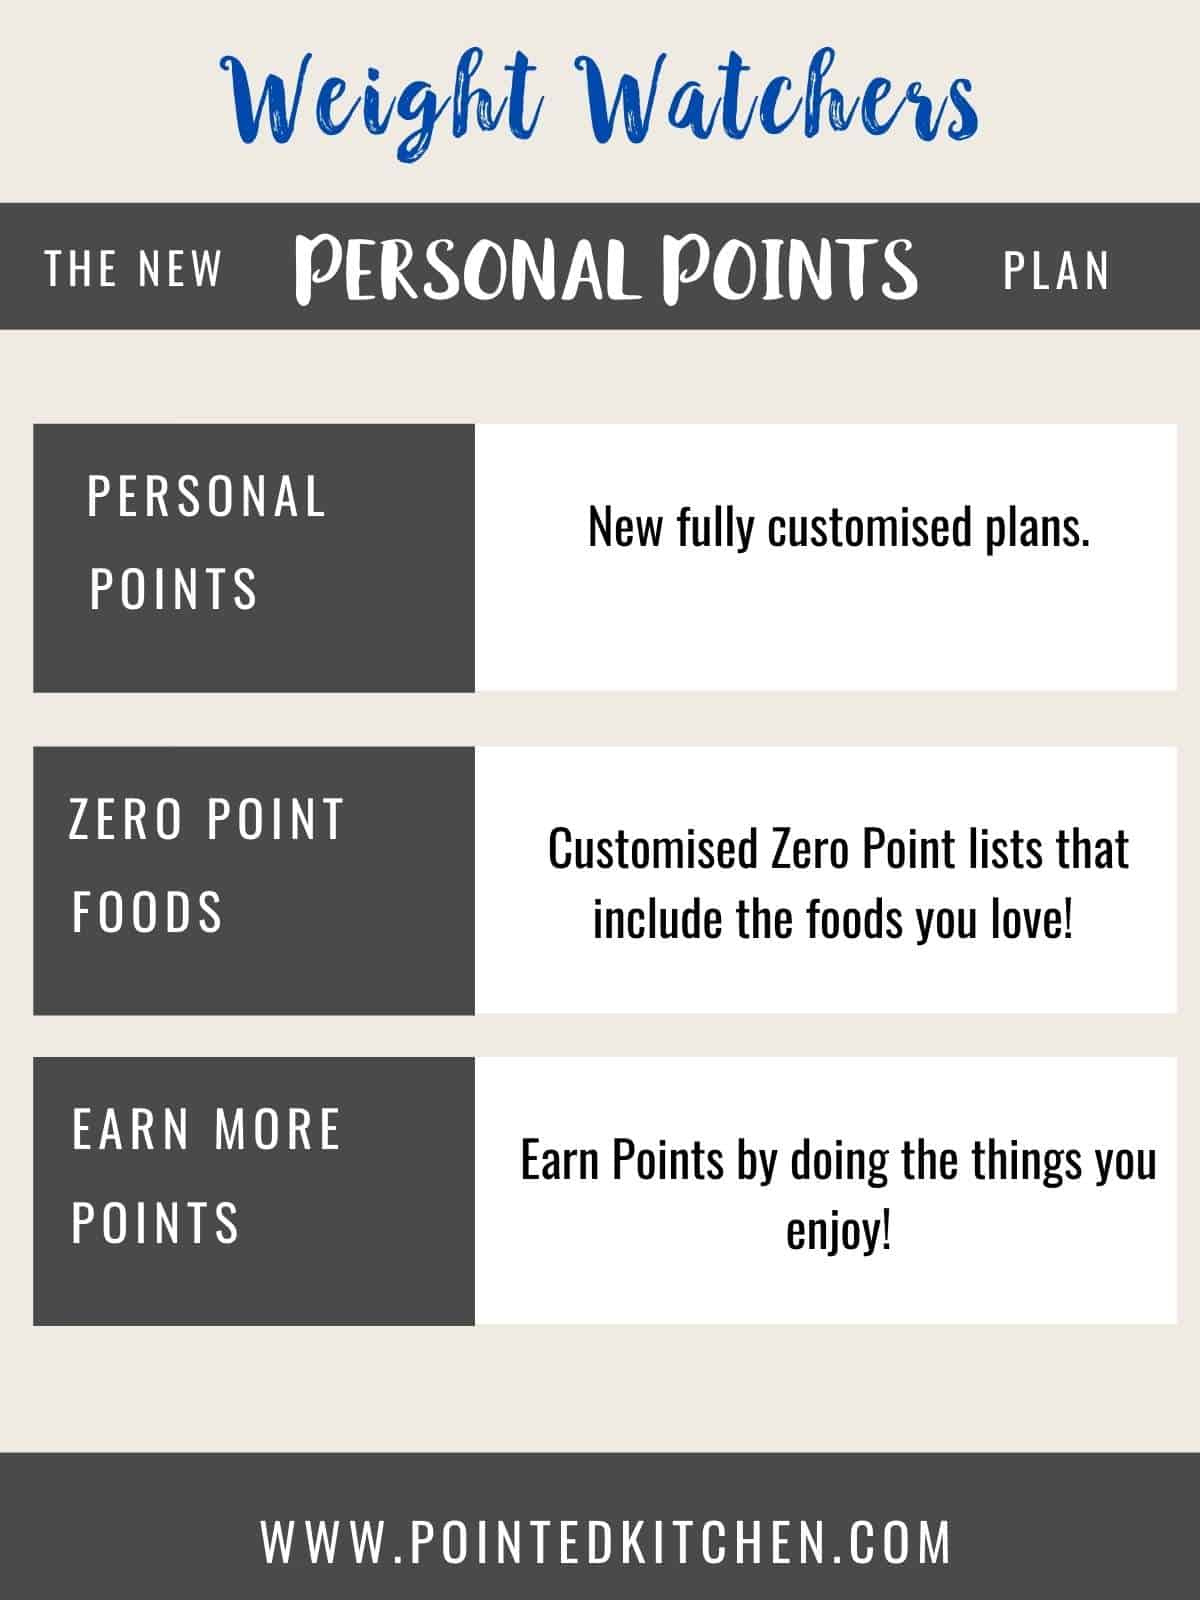 A graphic showing some of the main points of the Weight Watchers Personal Points plan.